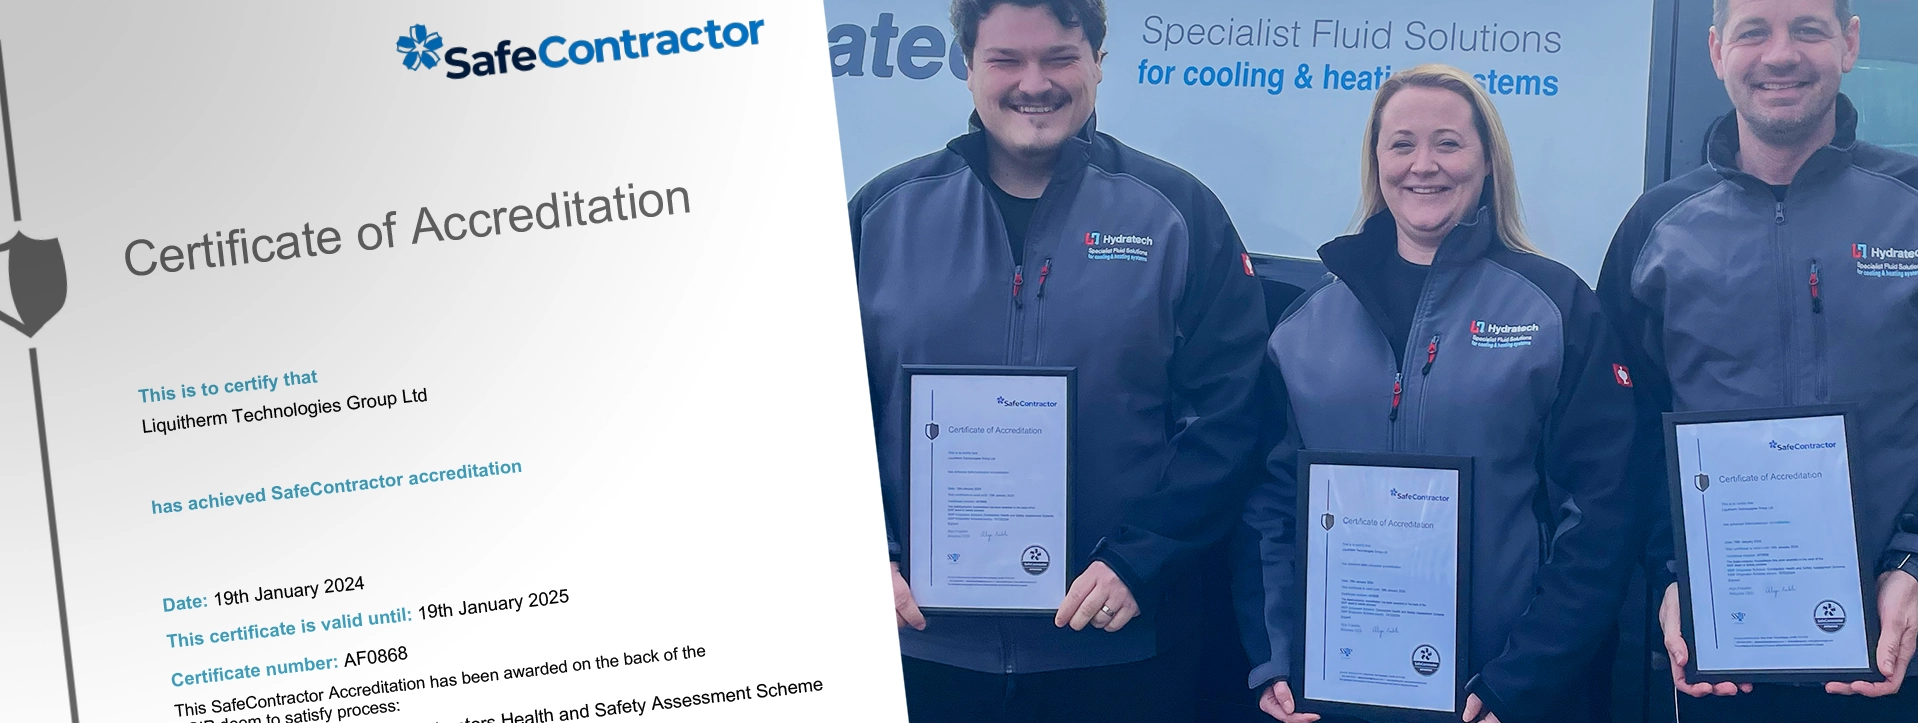 Hydratech showcase their high standards with SafeContractor accreditation